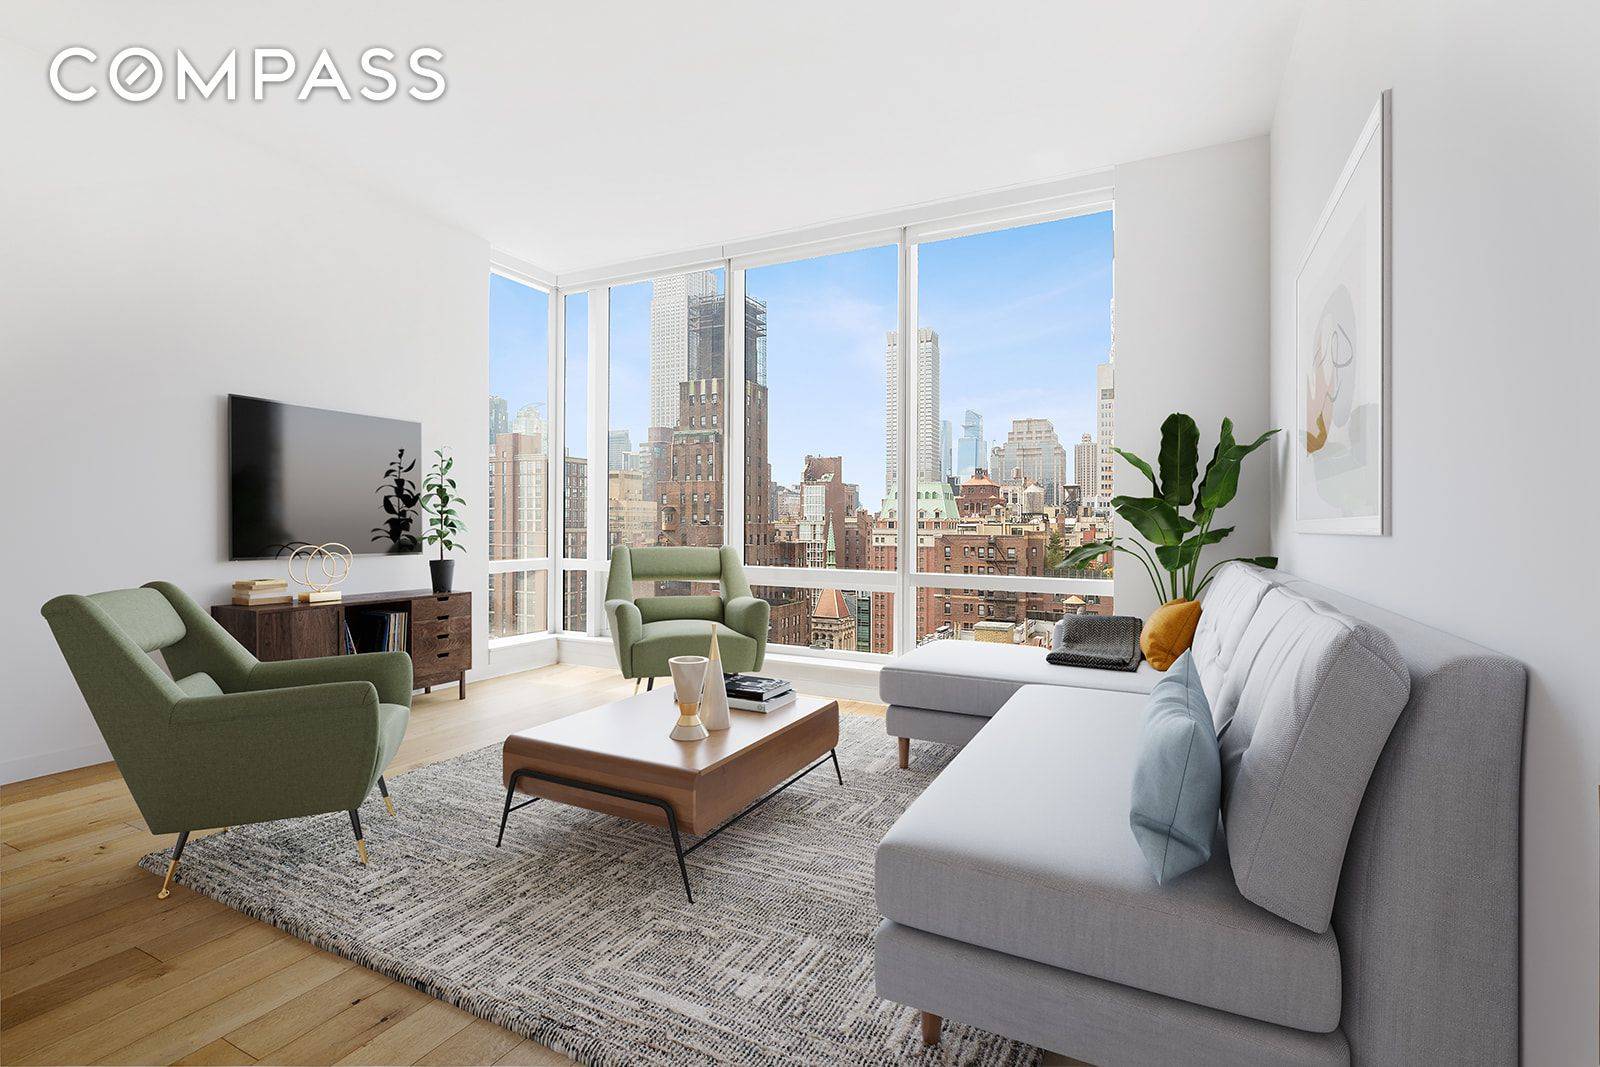 Stunning High Floor 1 Bedroom in a Full Service Luxury Building in Murray Hill Beautiful Open Kitchen with Liebherr, Bosch and Bertazzoni appliances 10ft Ceilings Empire State Building Views Stunning ...